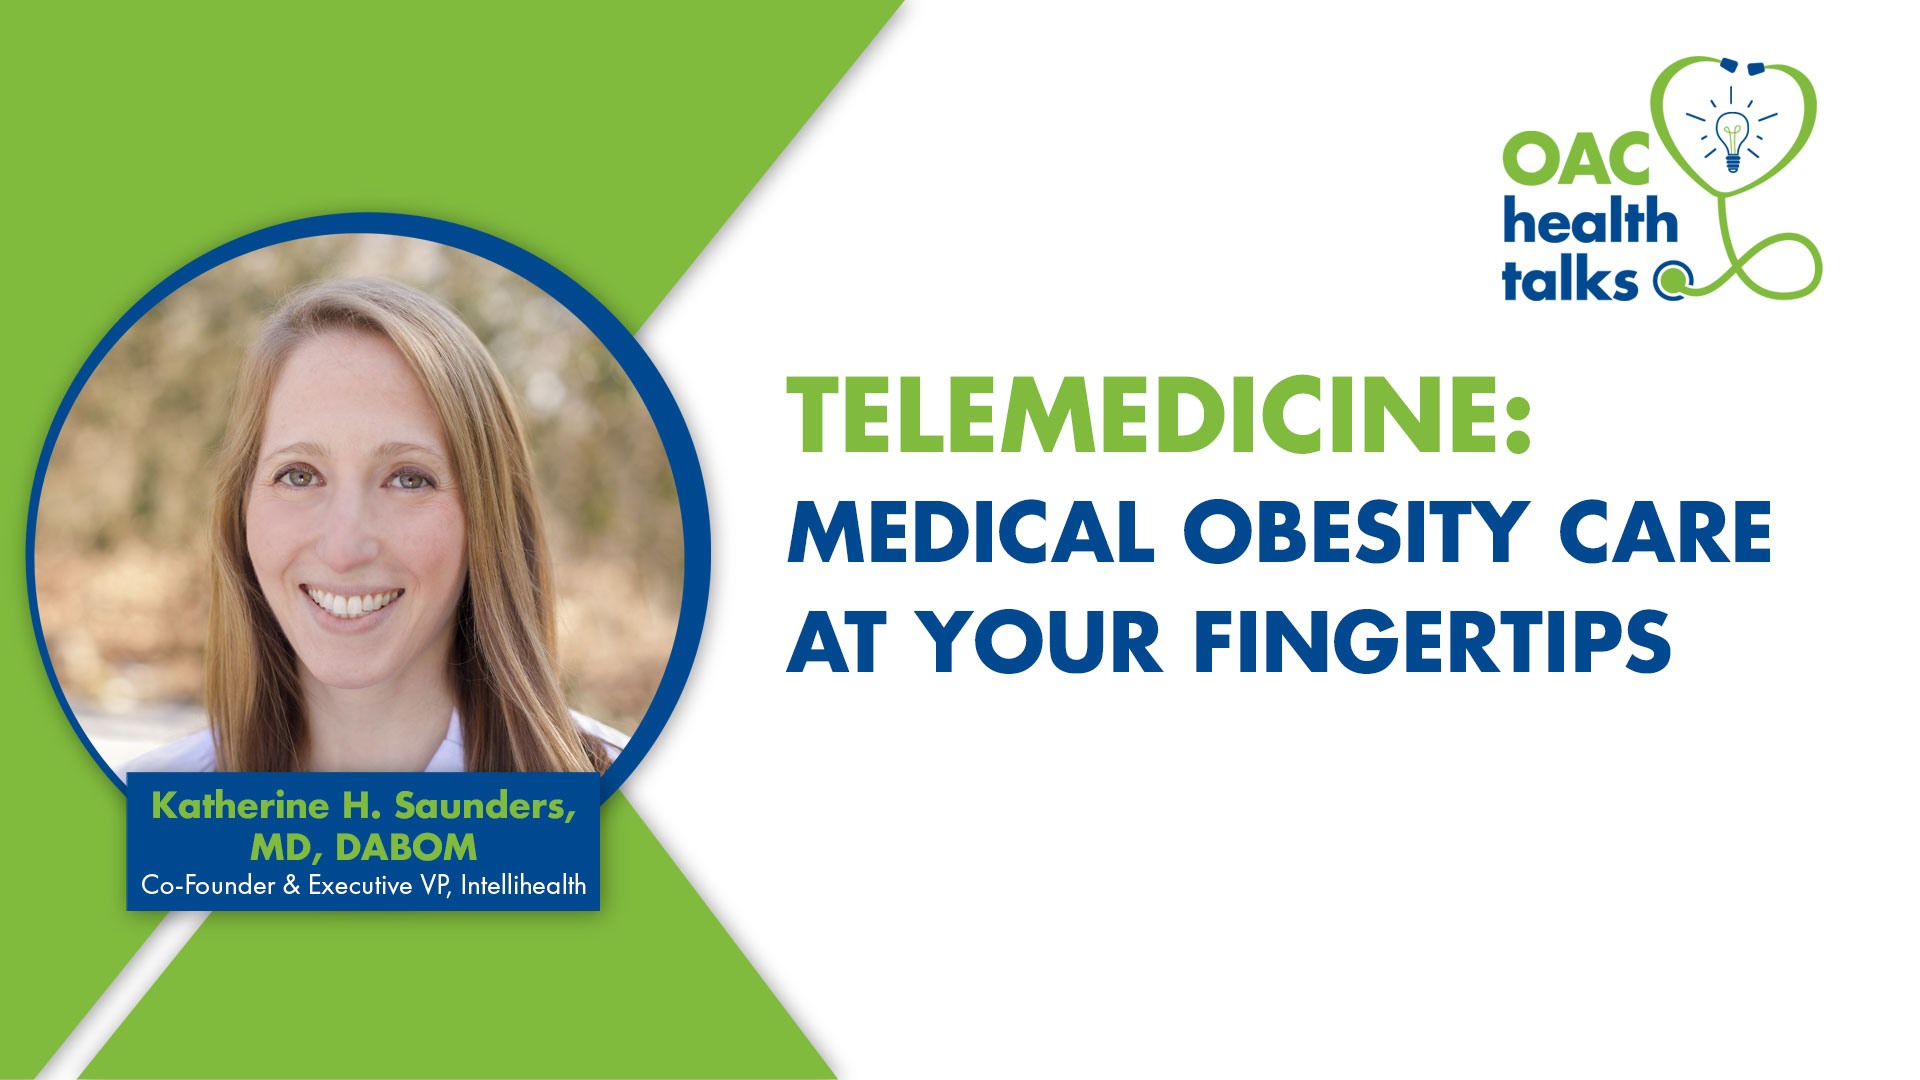 Telemedicine: Medical Obesity Care at Your Fingertips